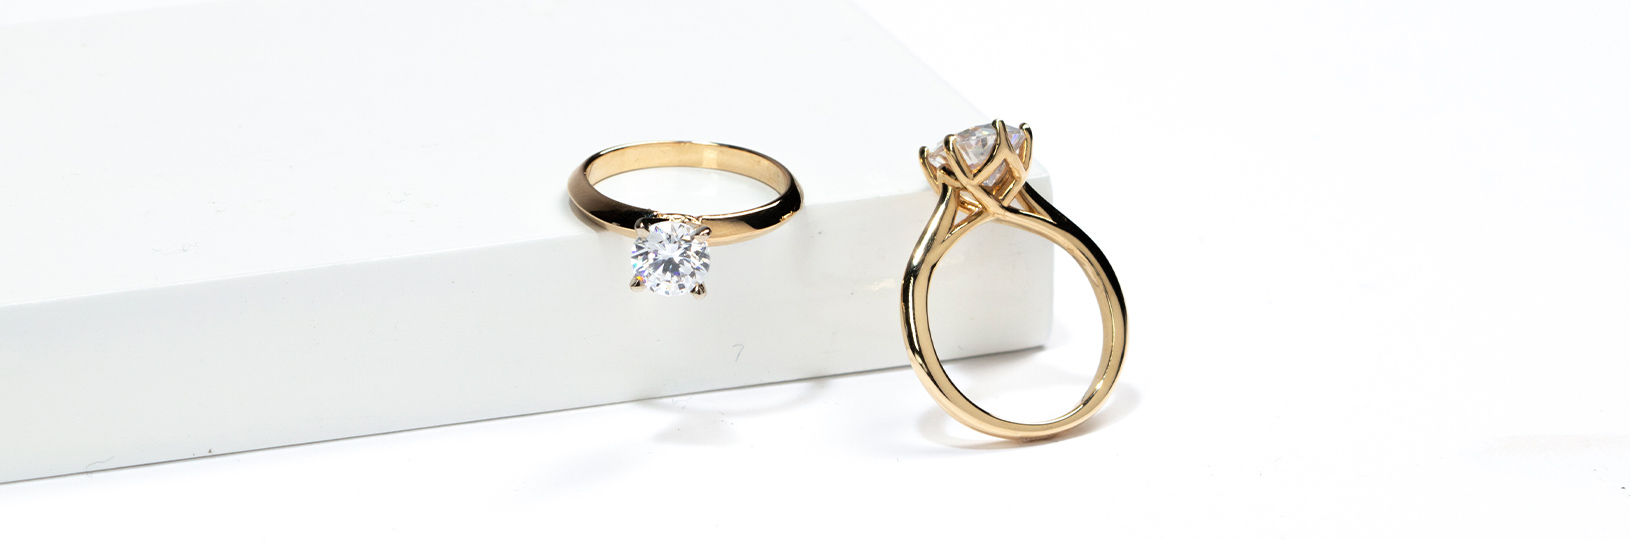 small engagement ring options in yellow gold